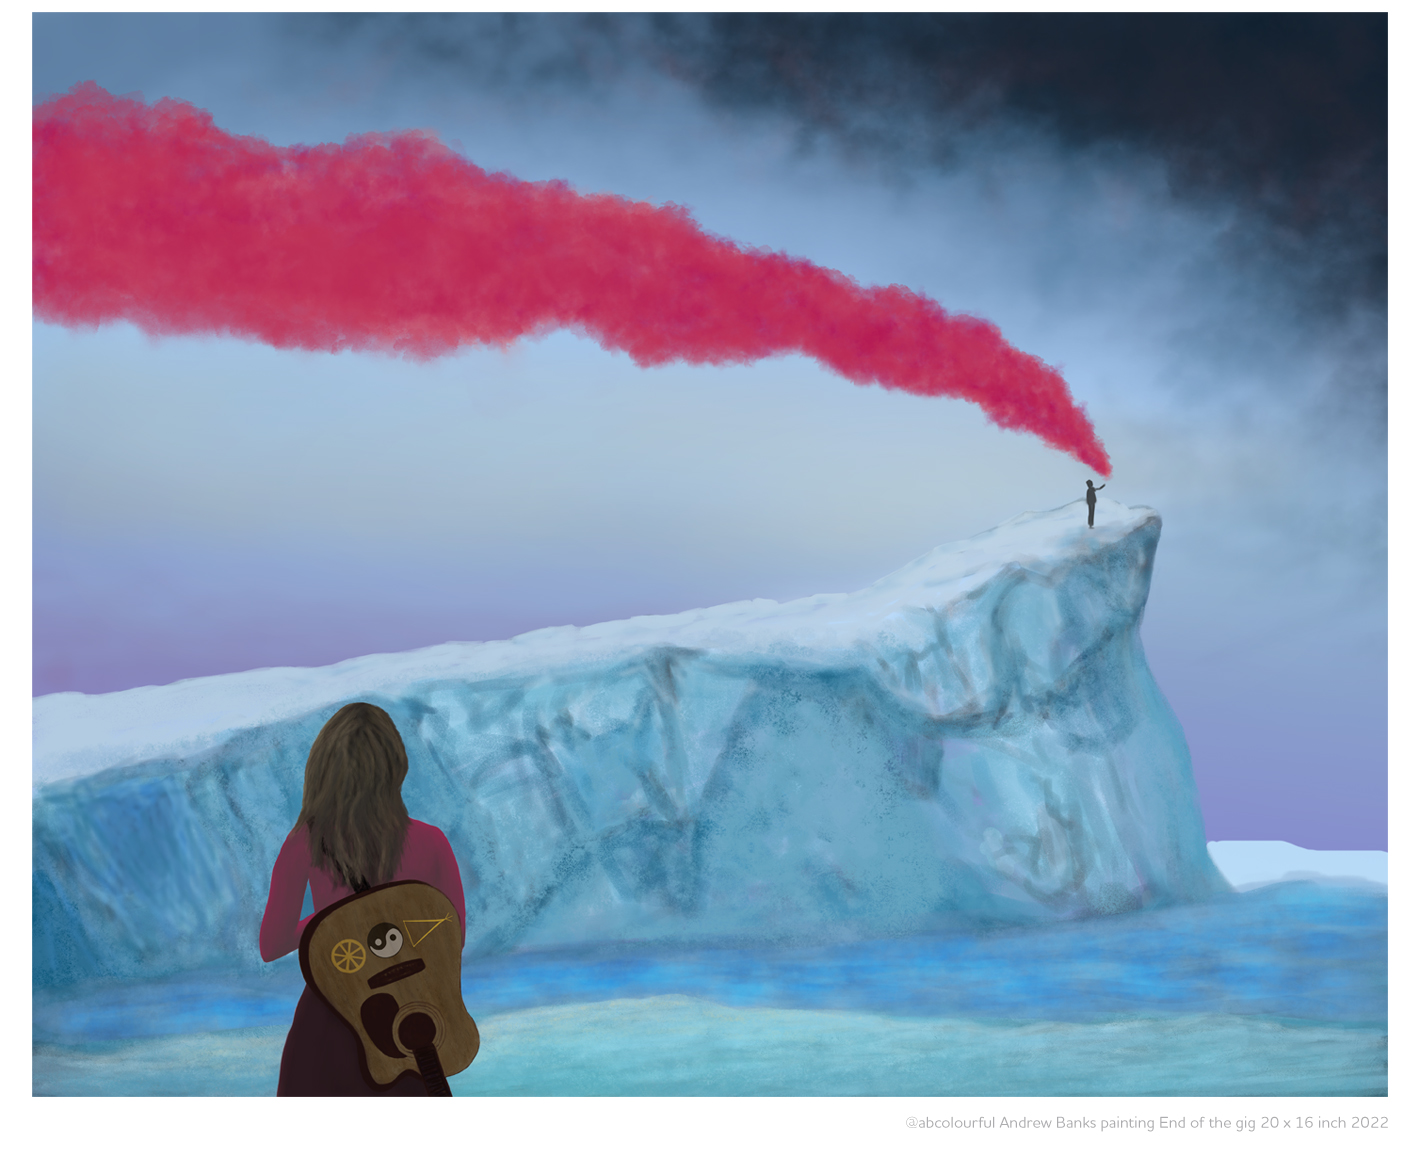 @abcolourful painting about #climate change #music #ice #guitar